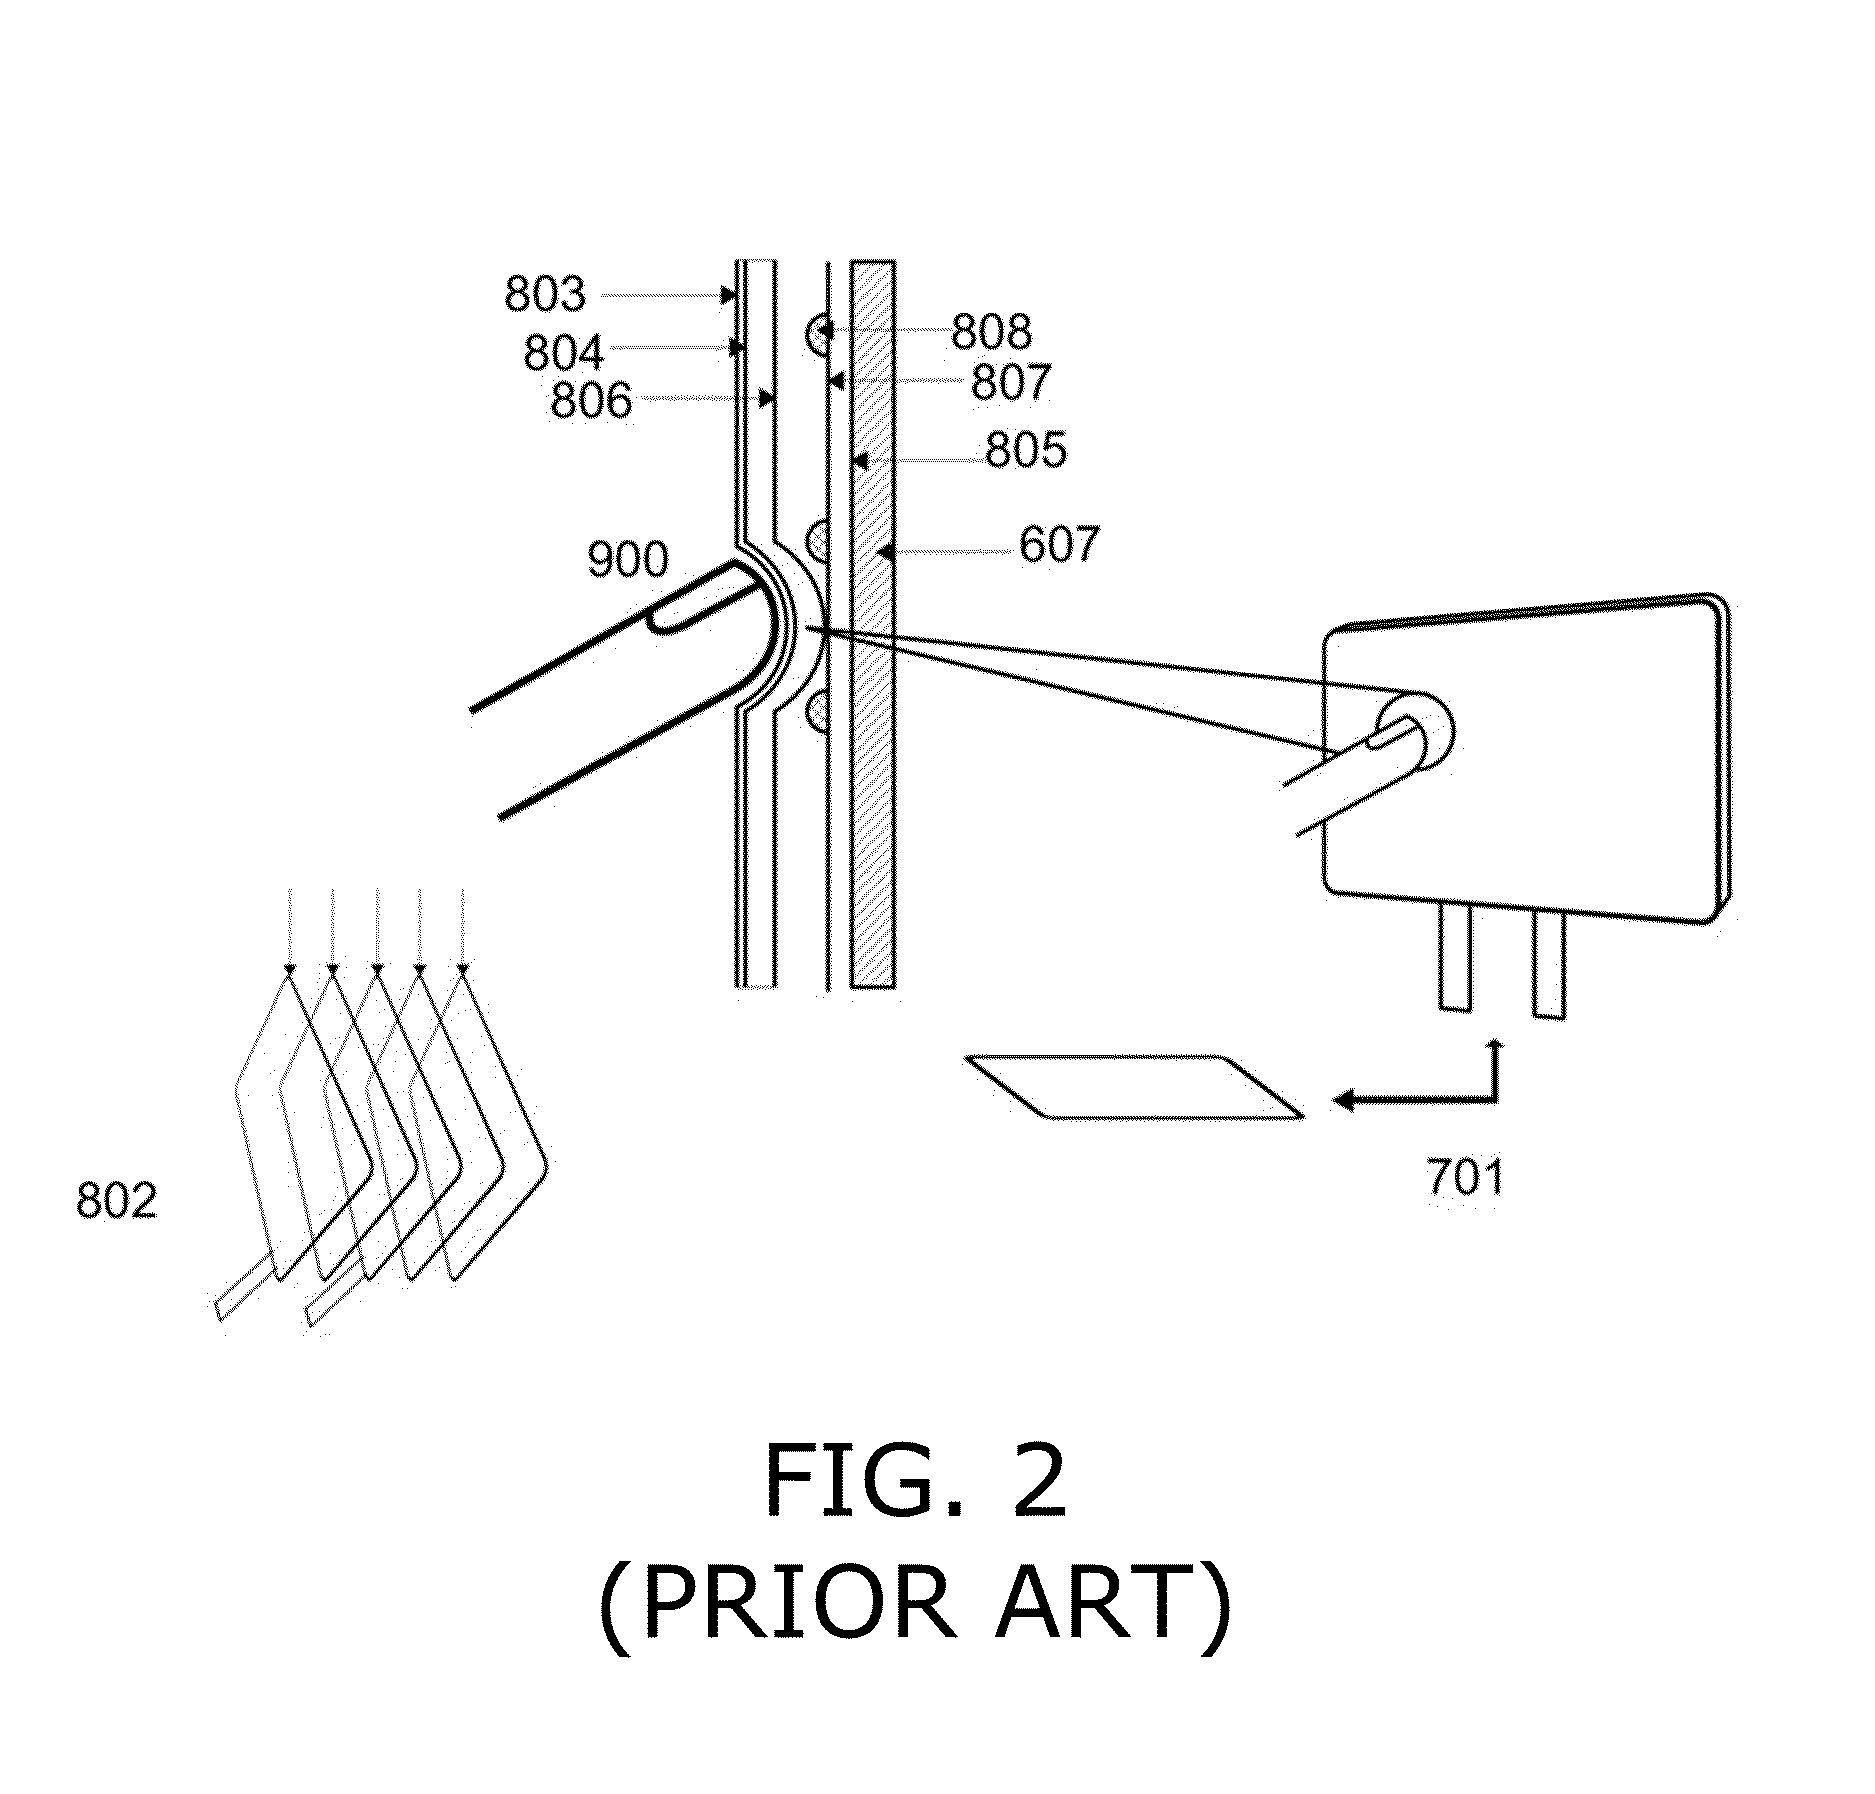 Light-based touch screen using elliptical and parabolic reflectors